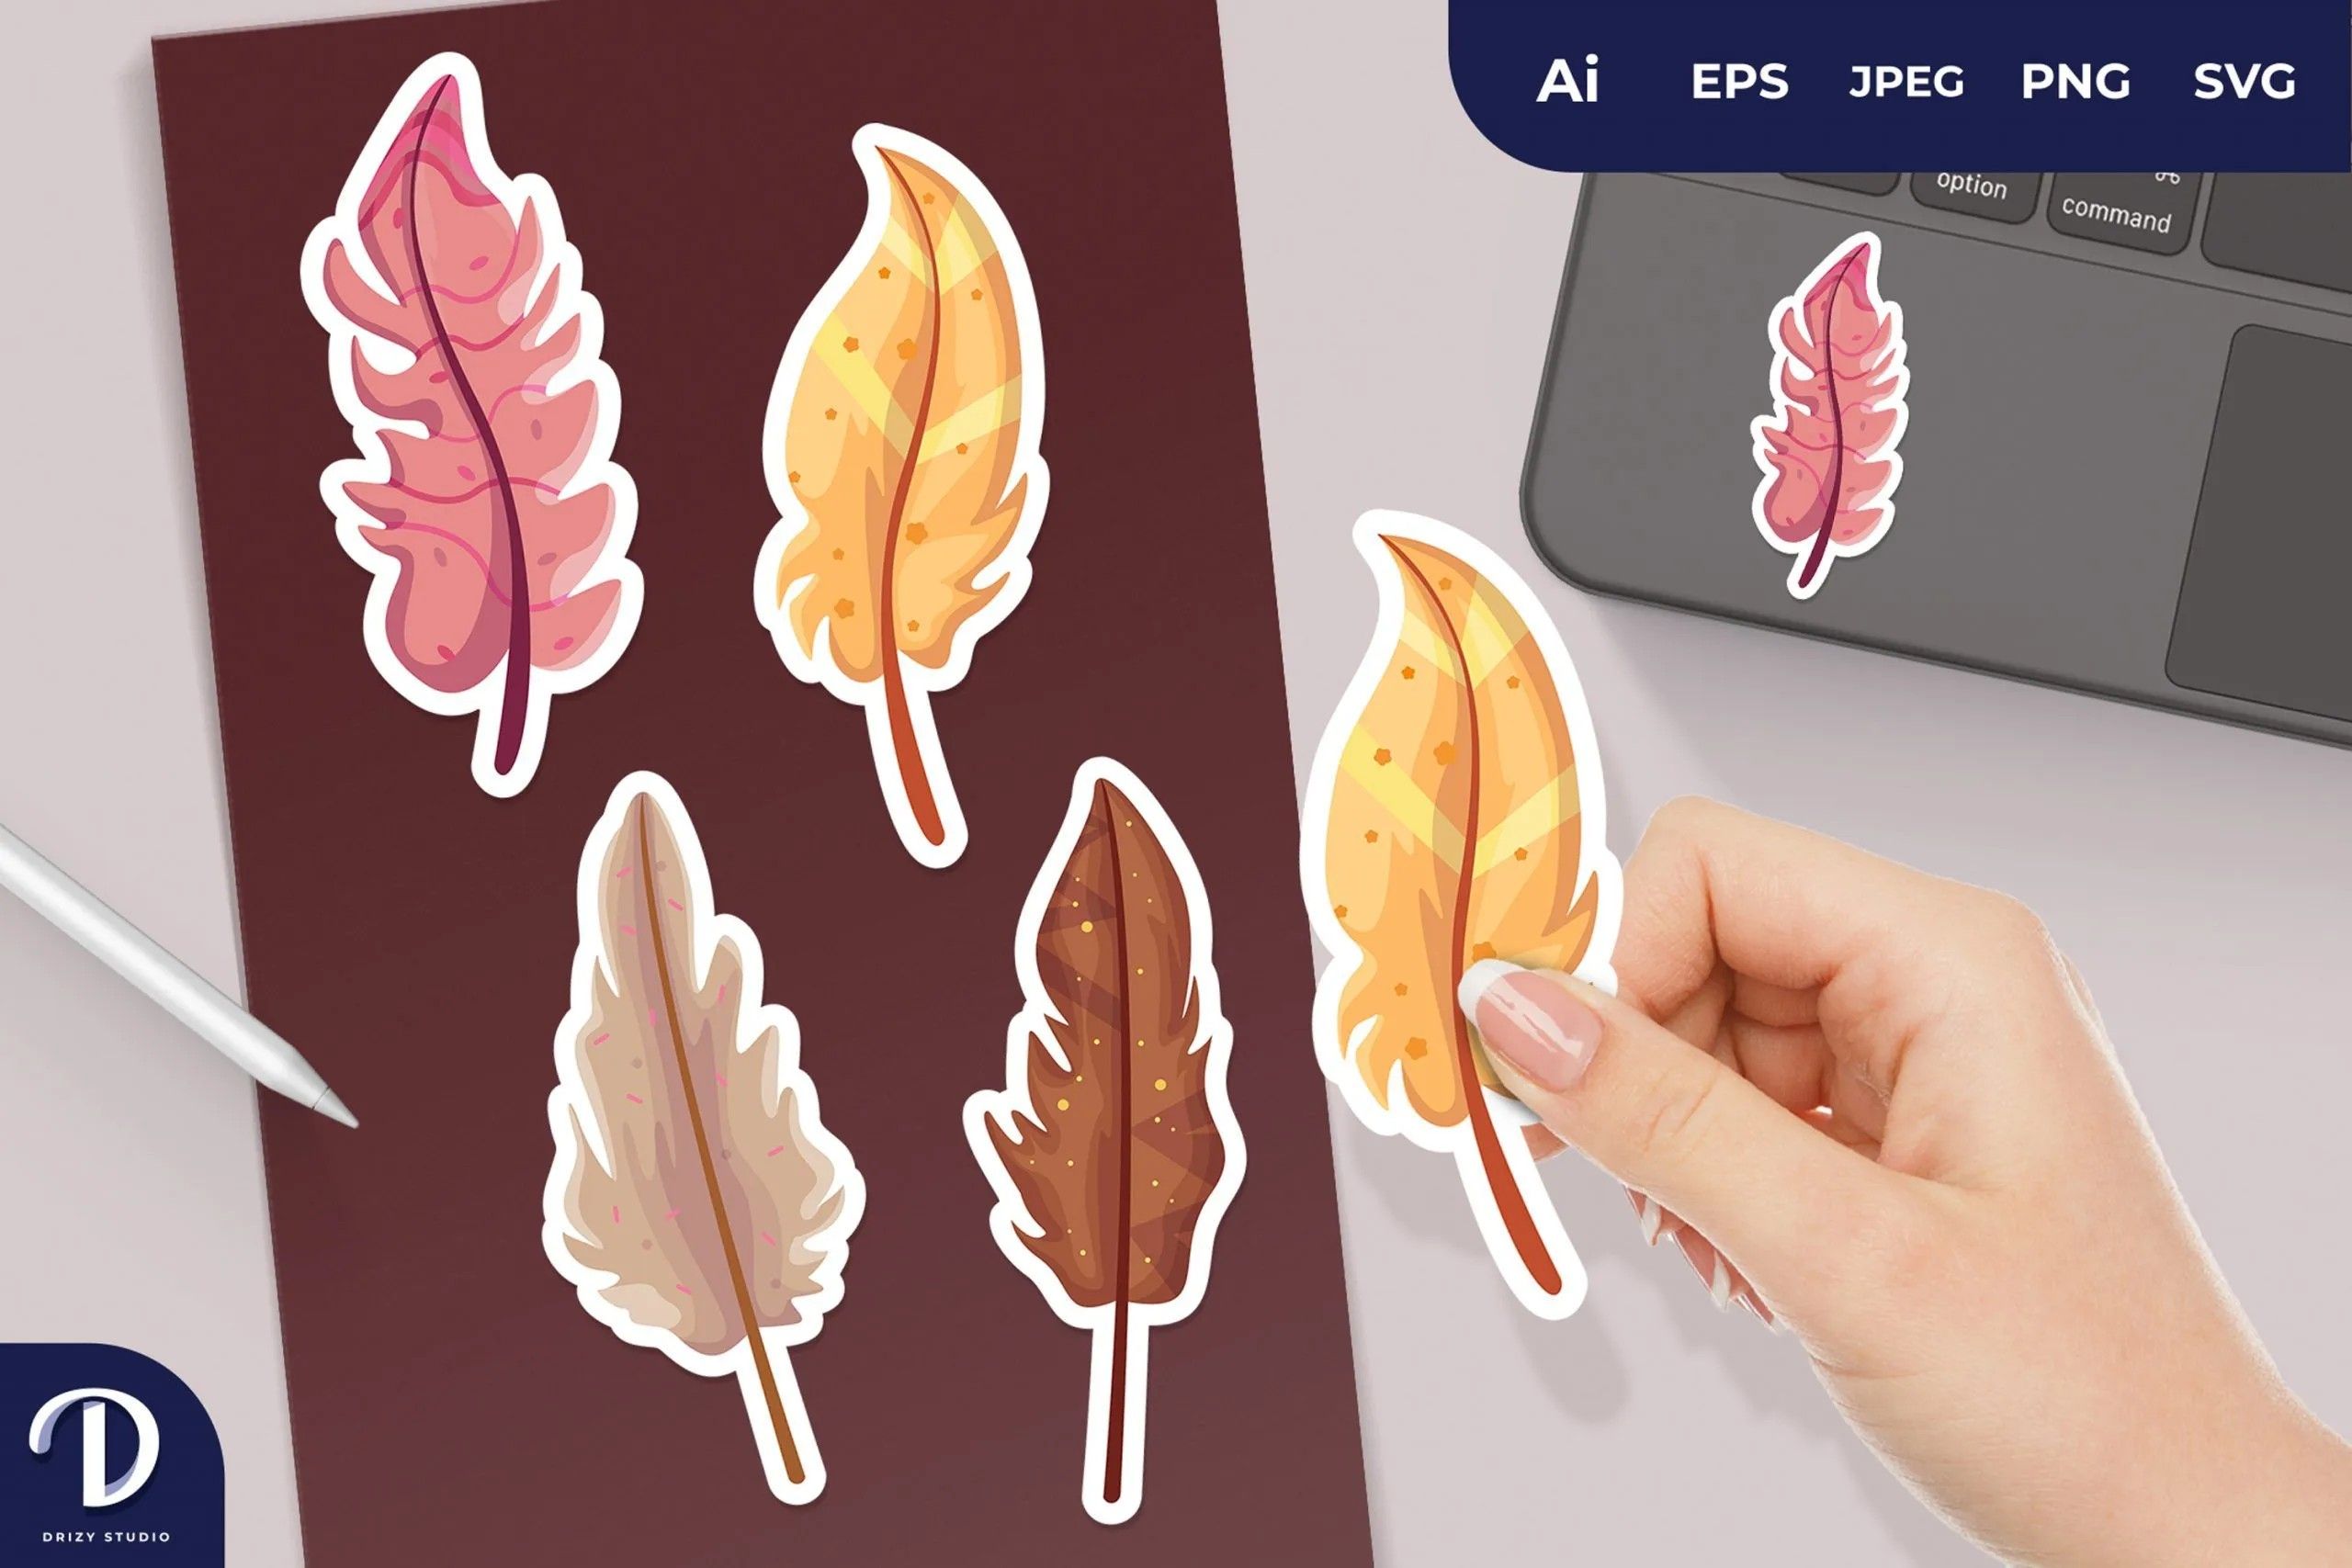 Homemade Stickers Ideas to Draw